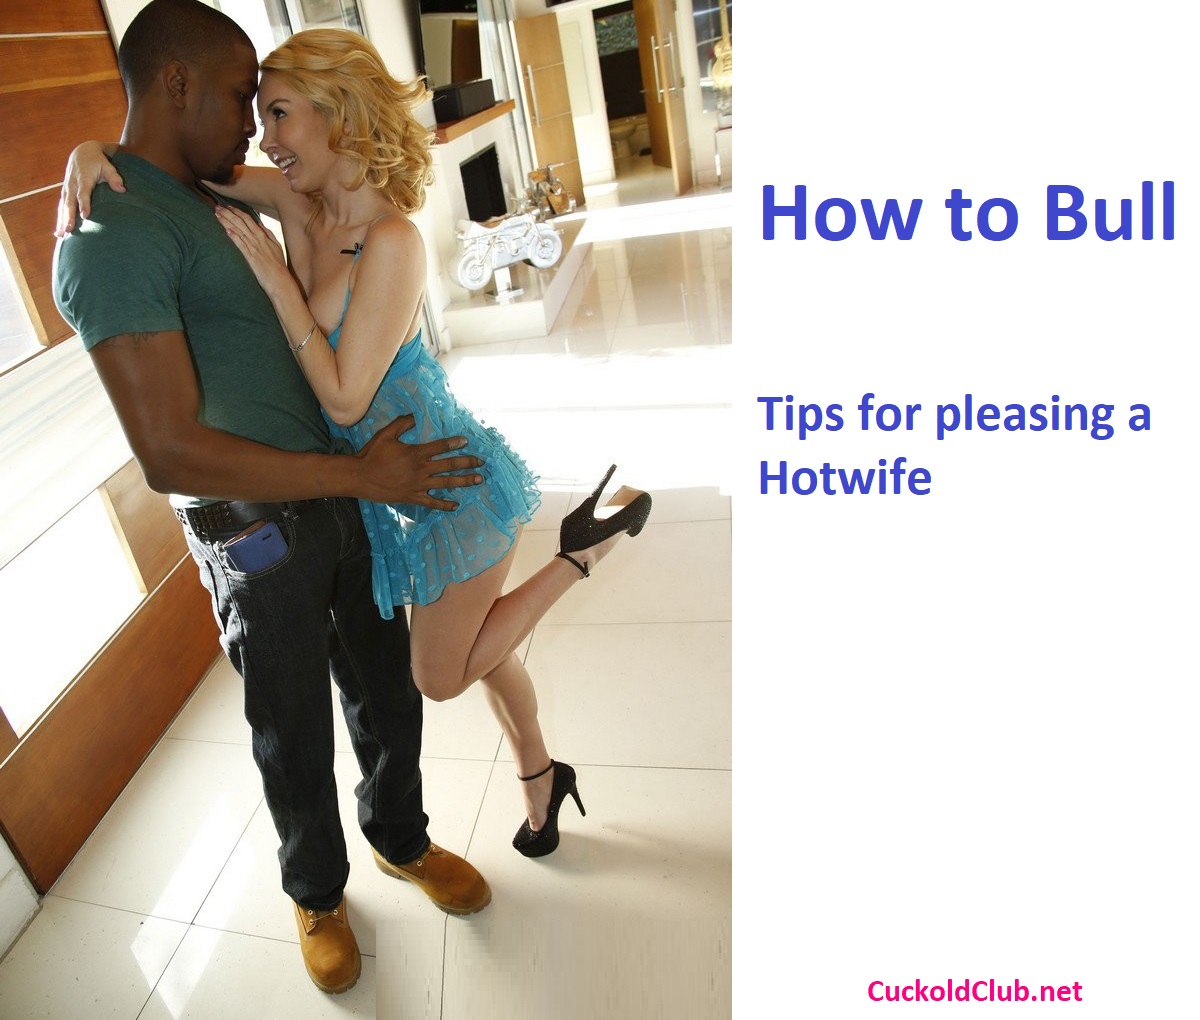 How to Bull - Tips for pleasing a Hotwife